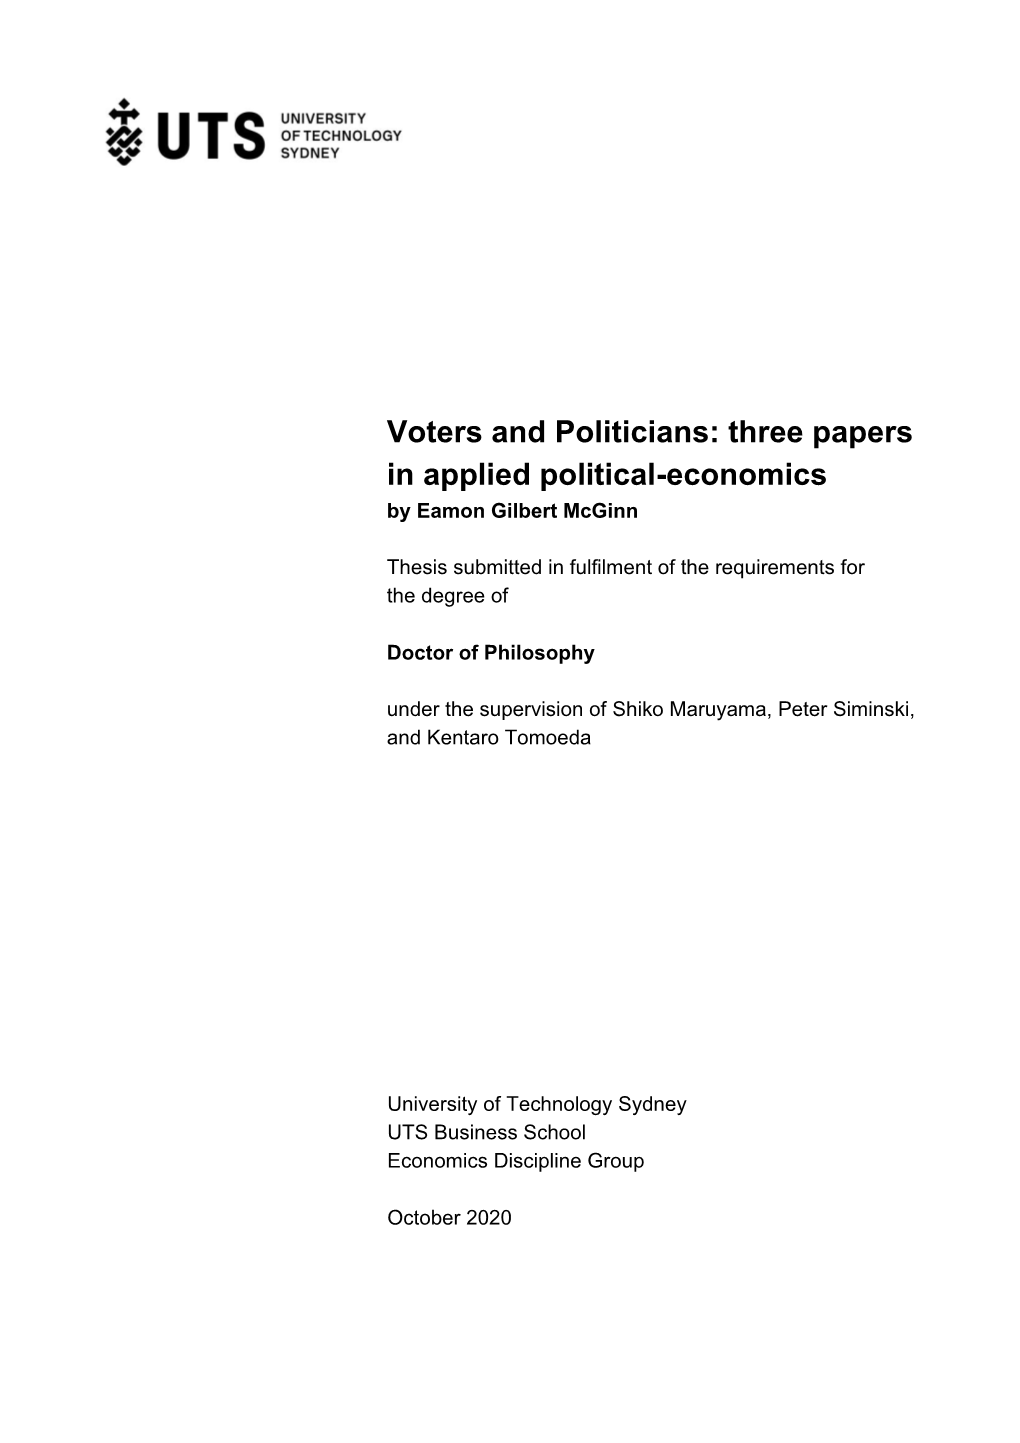 Voters and Politicians: Three Papers in Applied Political-Economics by Eamon Gilbert Mcginn